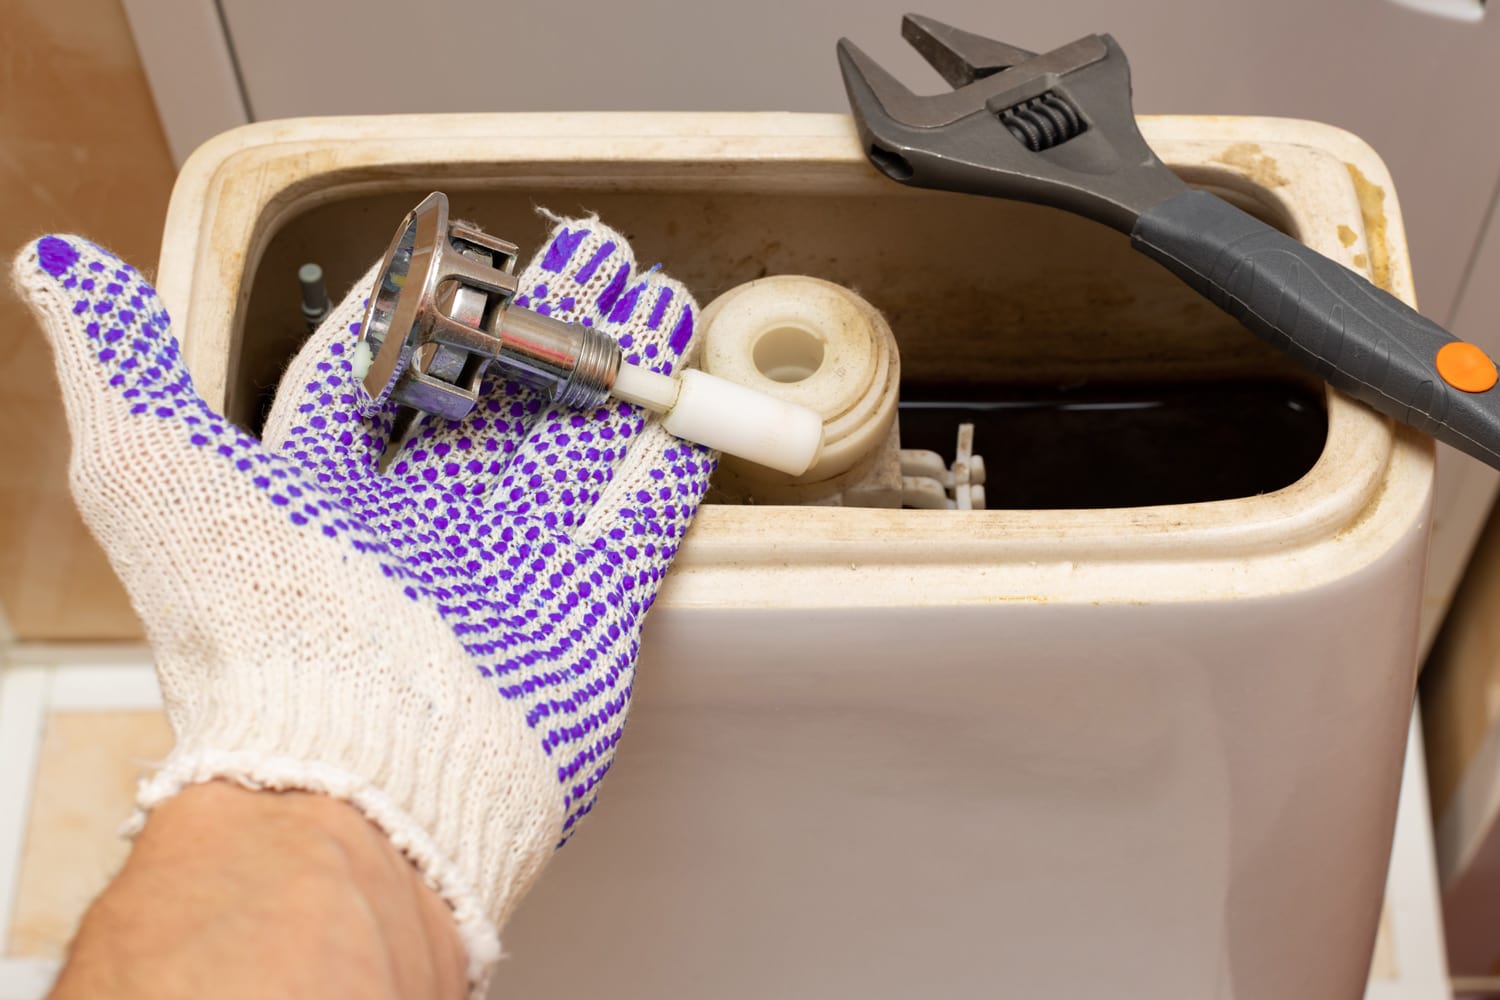 hand dismantling the flush mechanism of the toilet tank